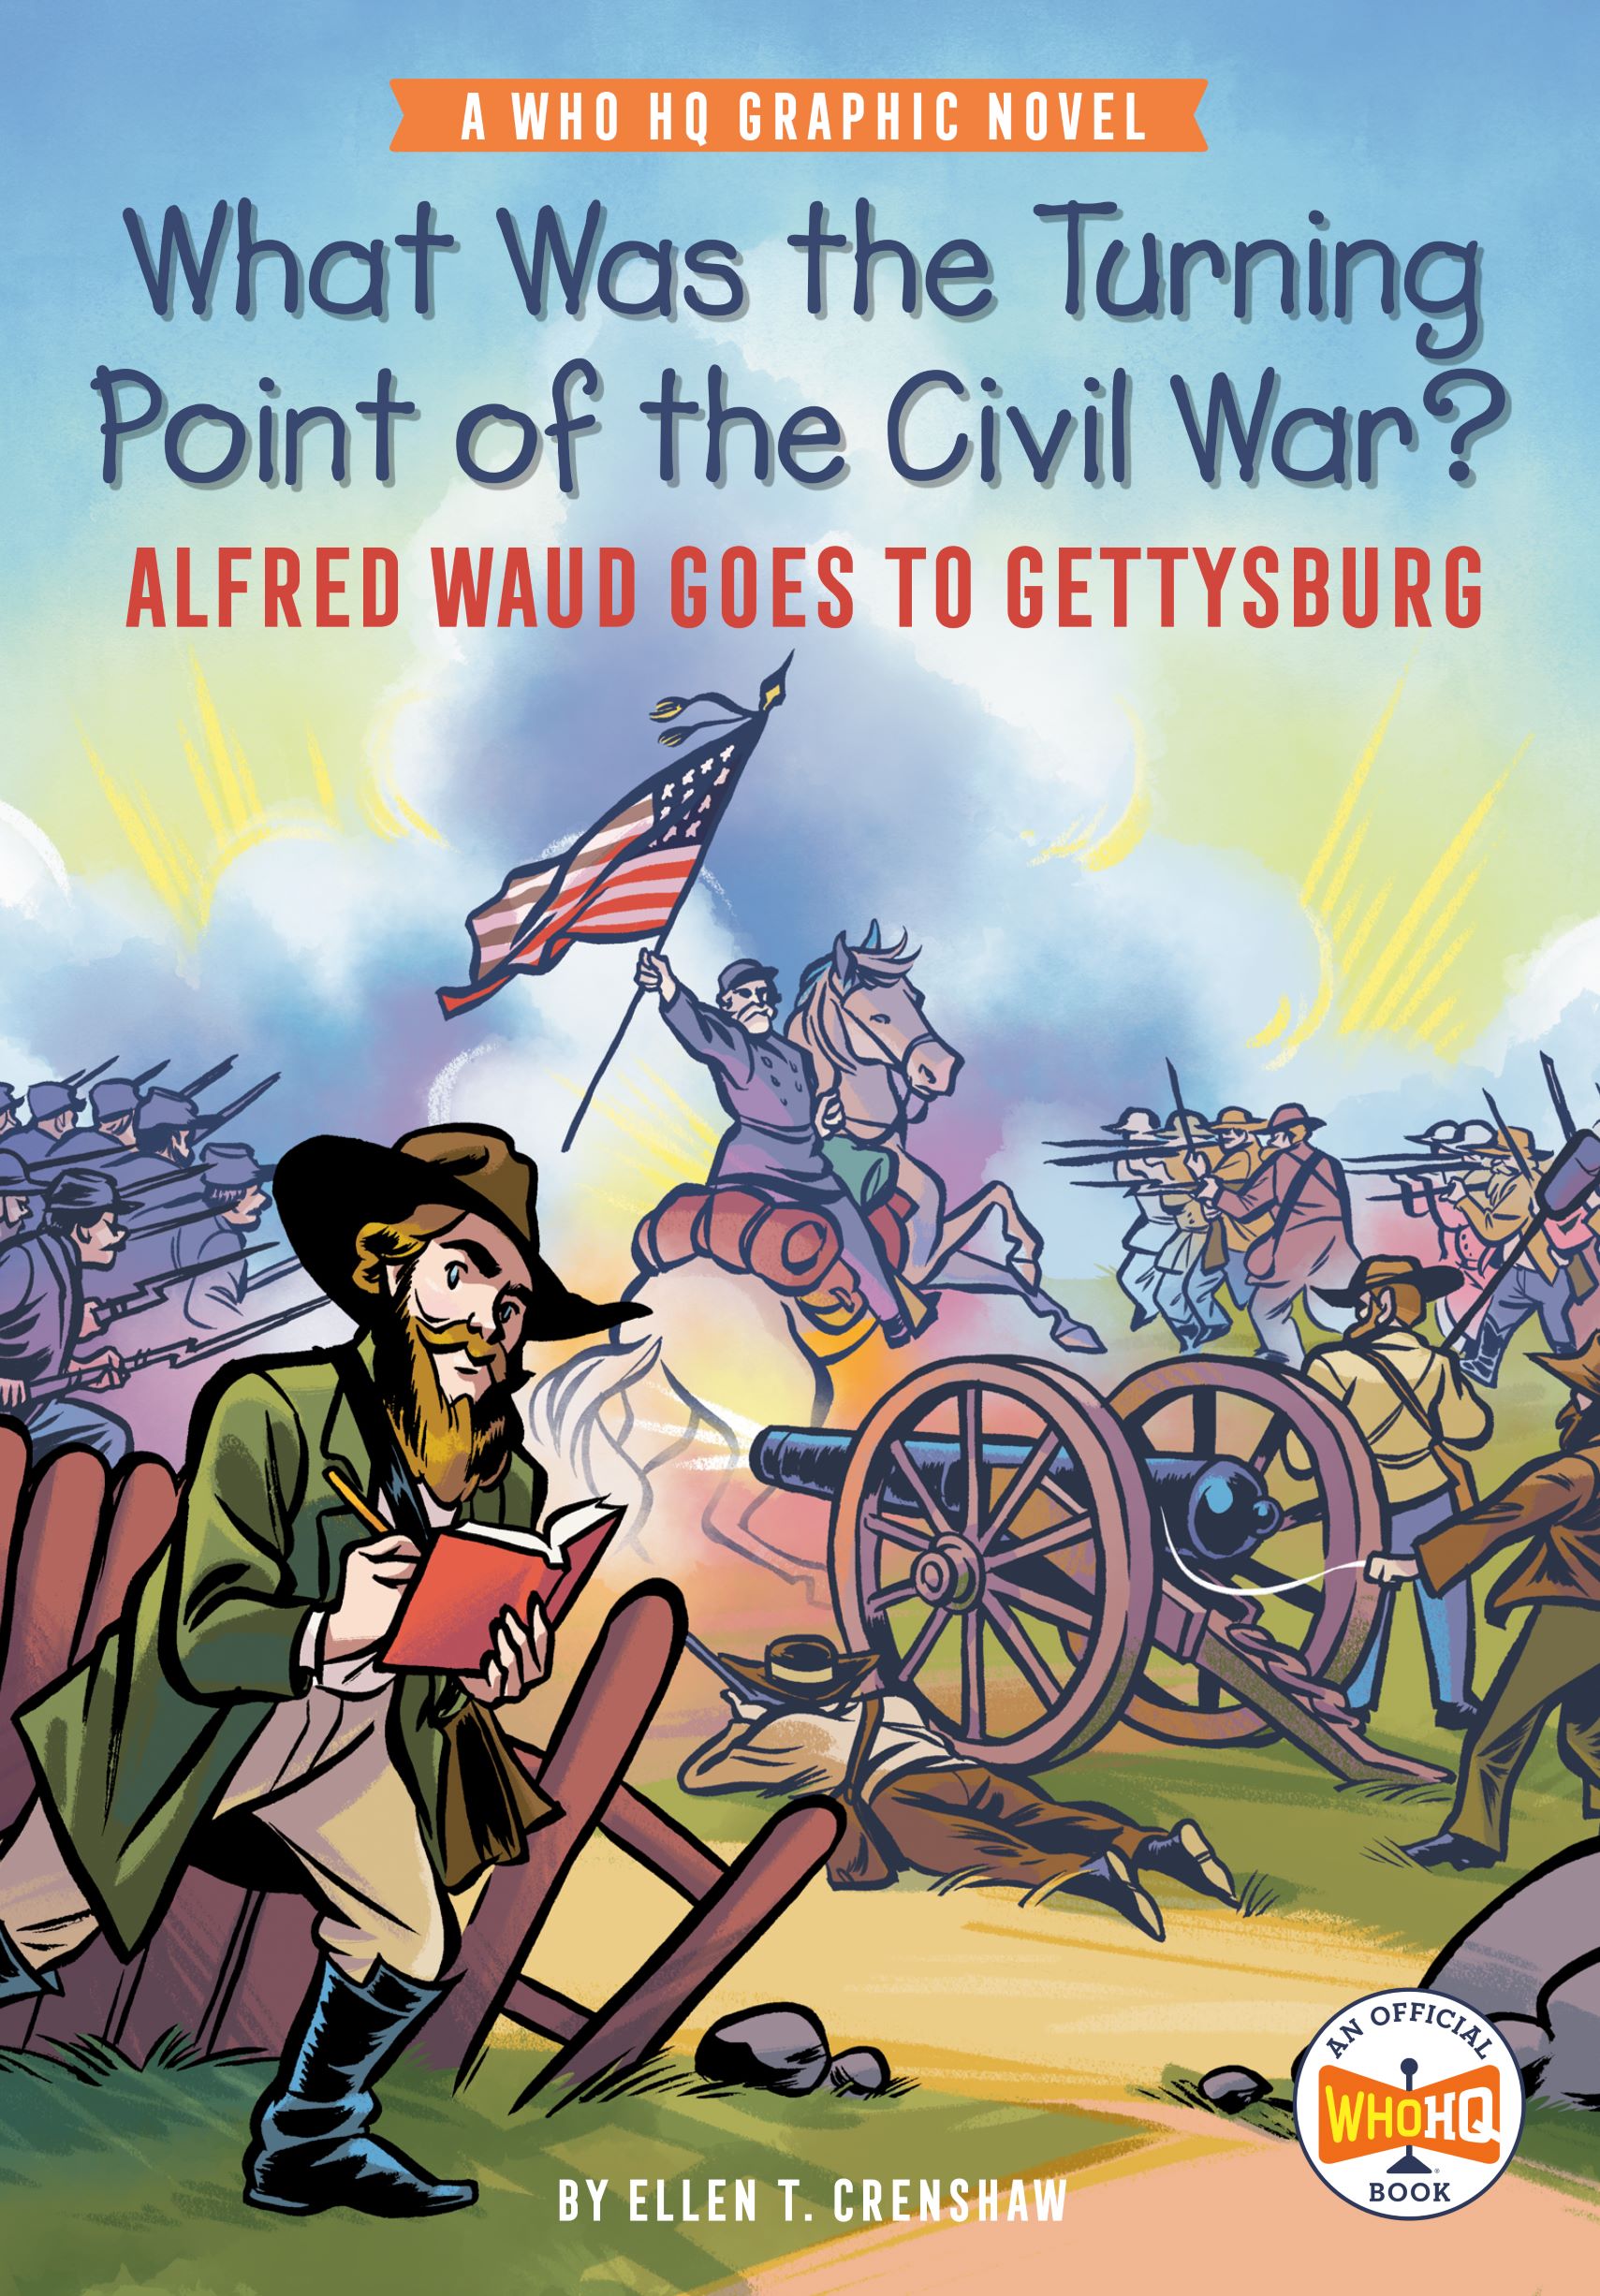 What Was The Turning Point of the Civil War? Alfred Waud Goes To Gettysburg